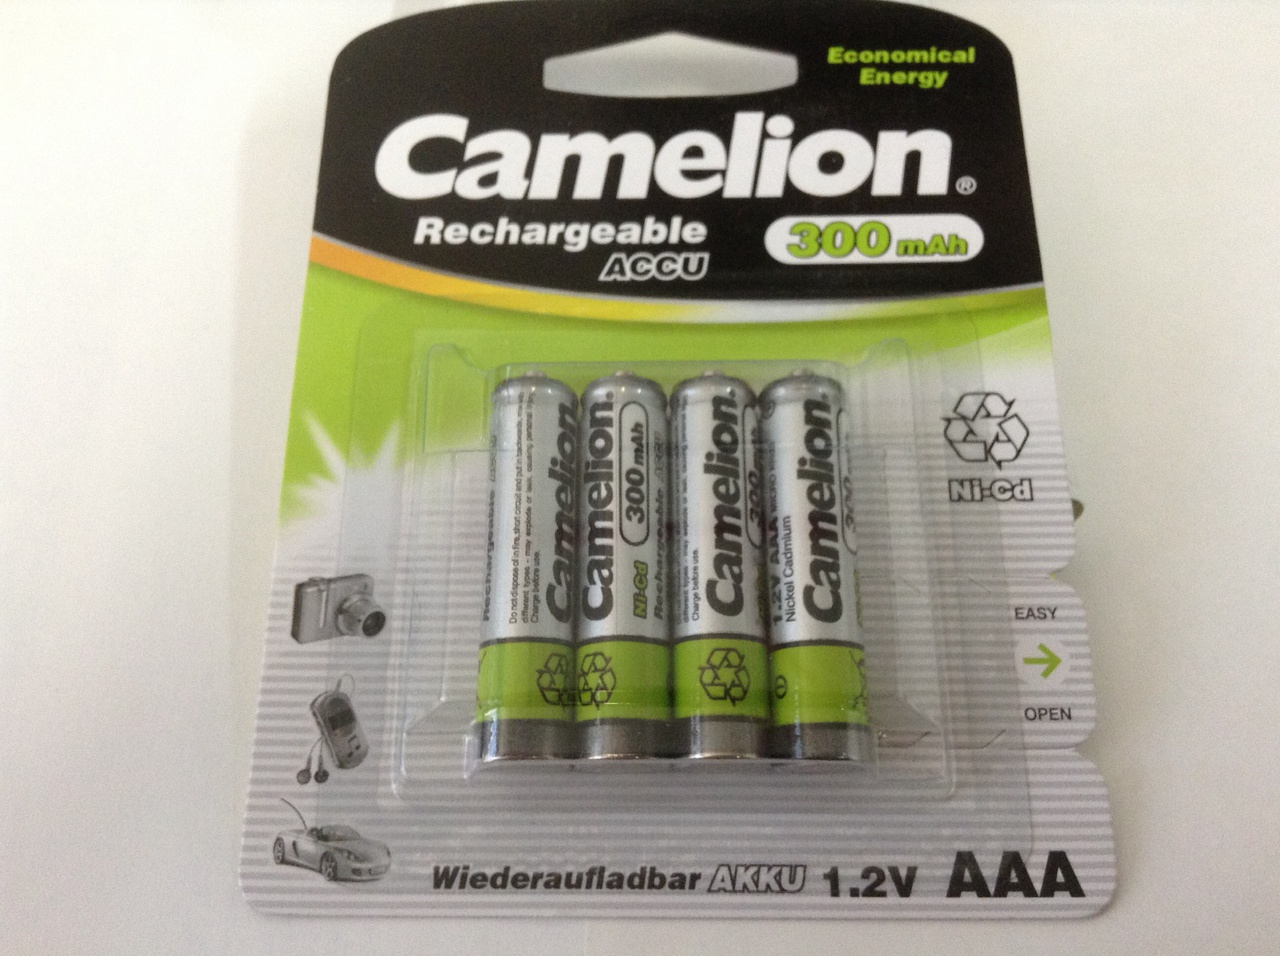 Camelion Economical Energy AAA Rechargeable NiCD Batteries 300mAh 4 Pack Retail + FREE SHIPPING!